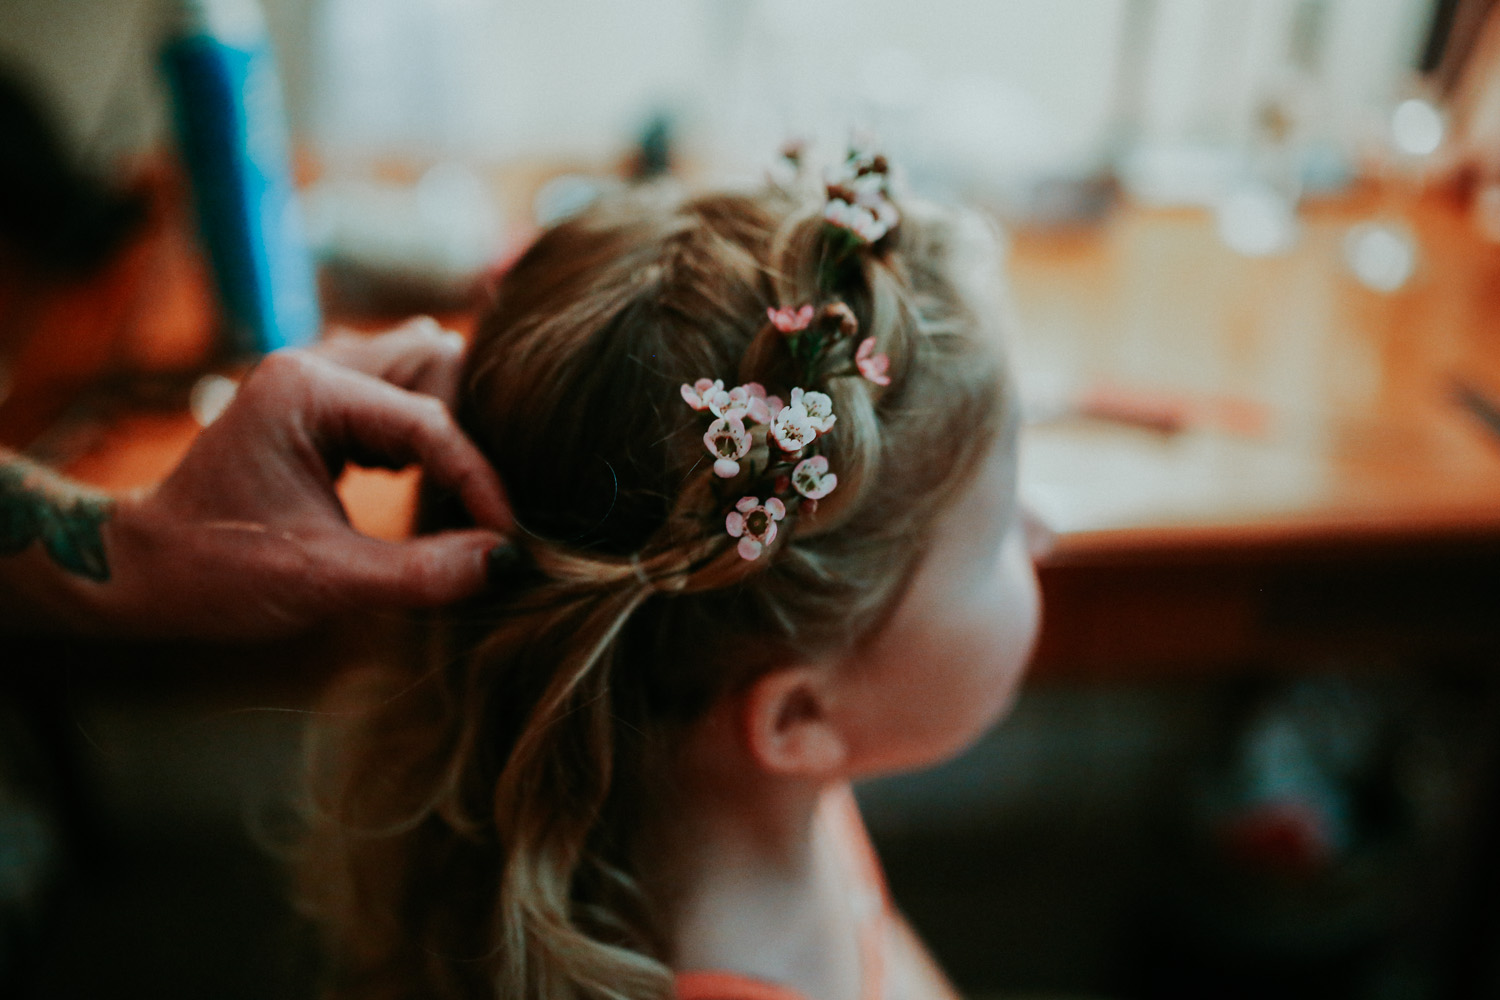 daughter of the bride having her hair done